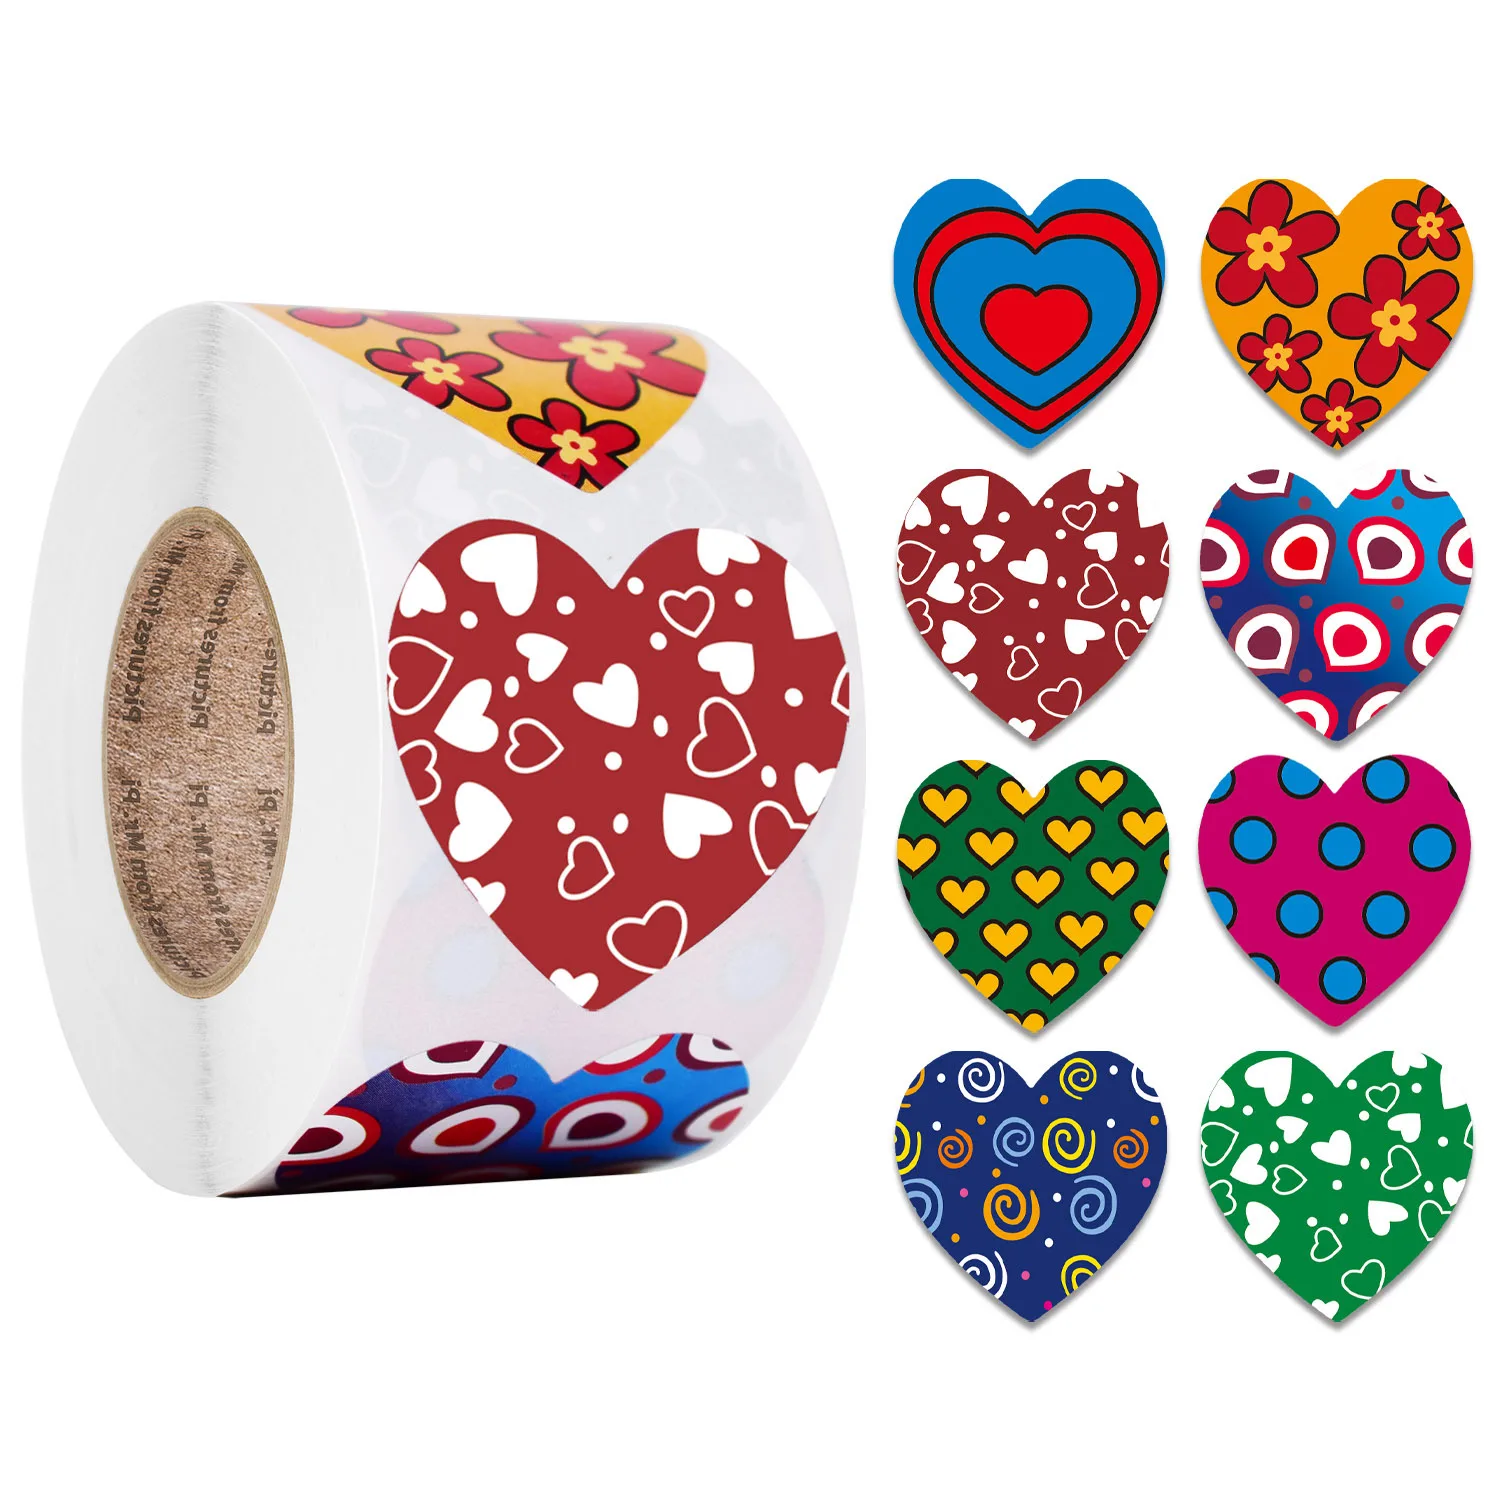 100-500pcs Heart Stickers Love seal labels for Valentine's Day 8 Patterns Gift Packaging Wedding Decor Stationery Stickers